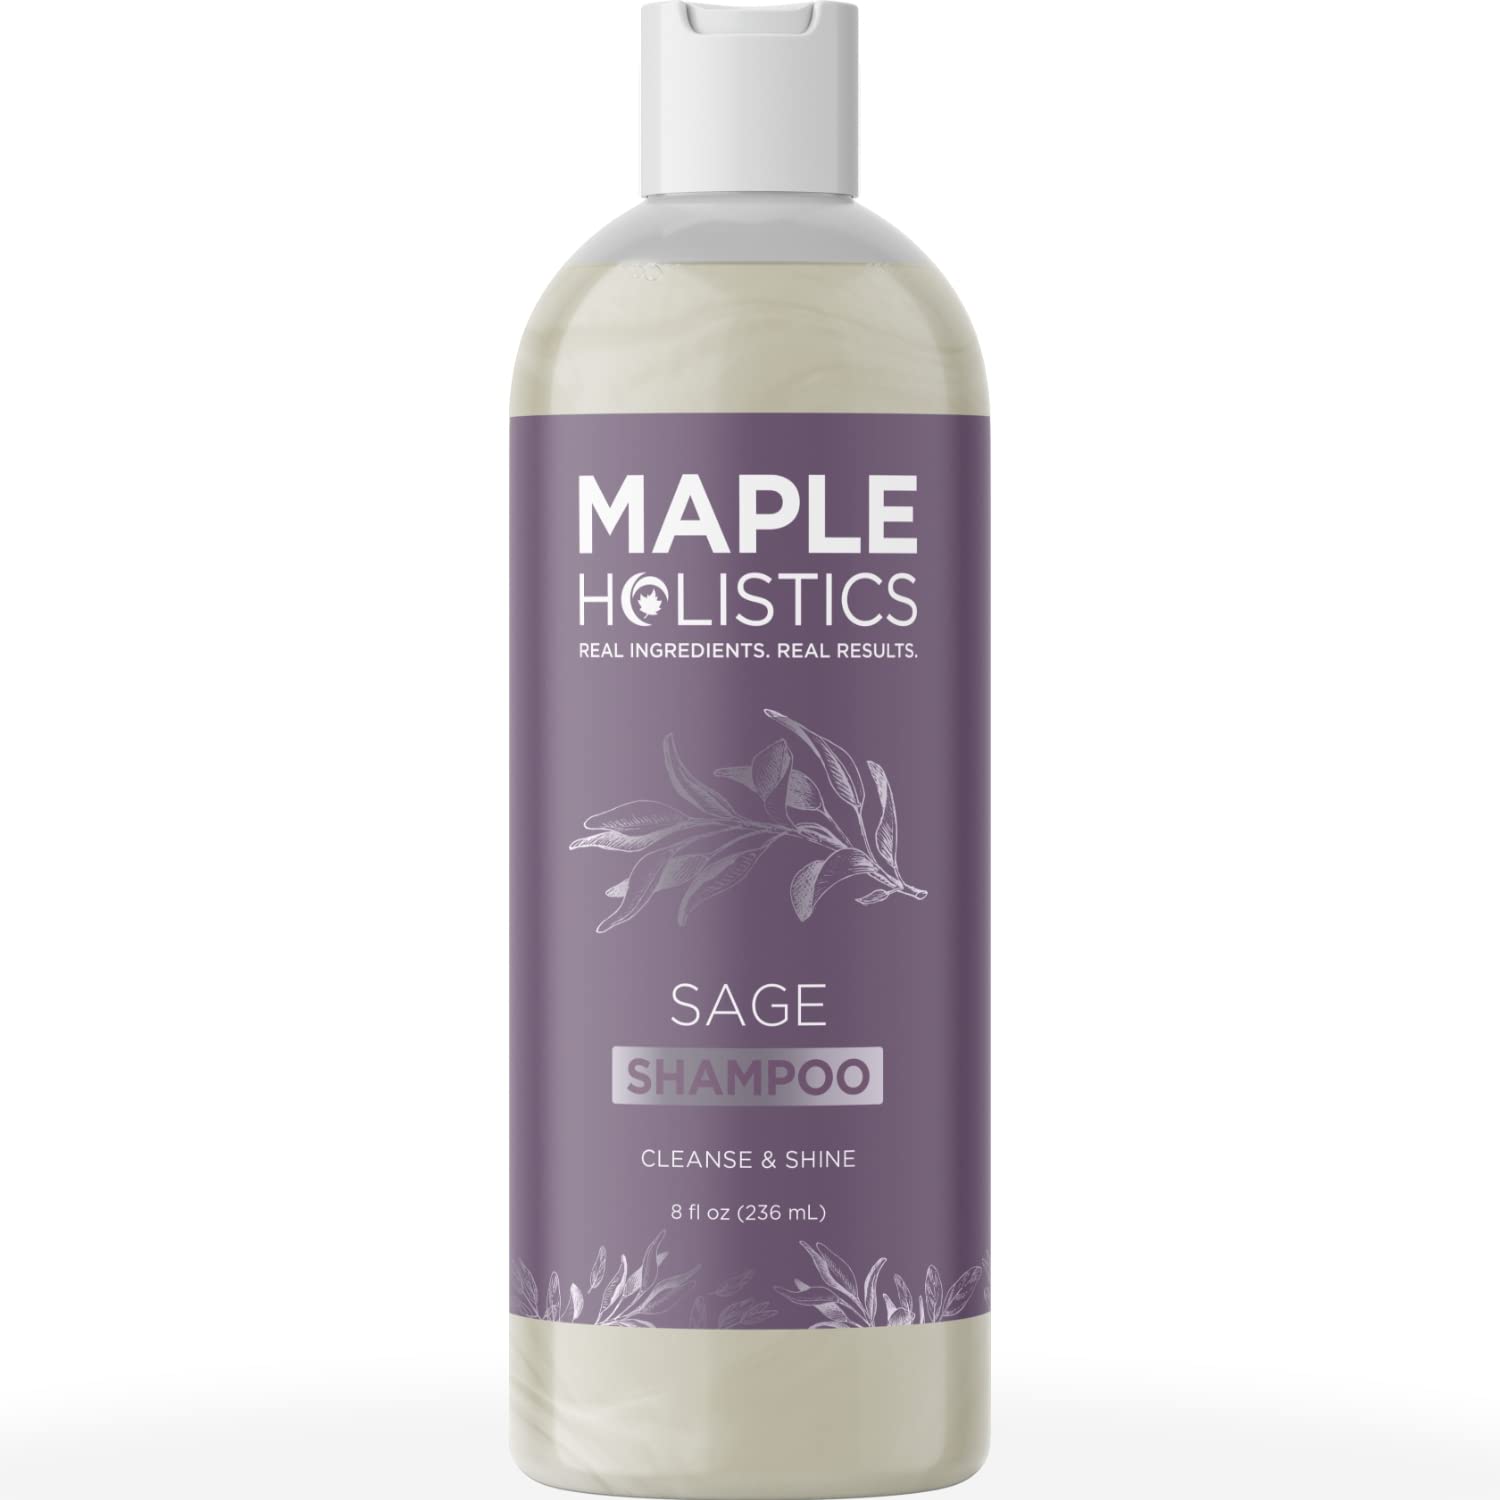 Sage and Rosemary Shampoo Sulfate Free - Sage Oil [...]